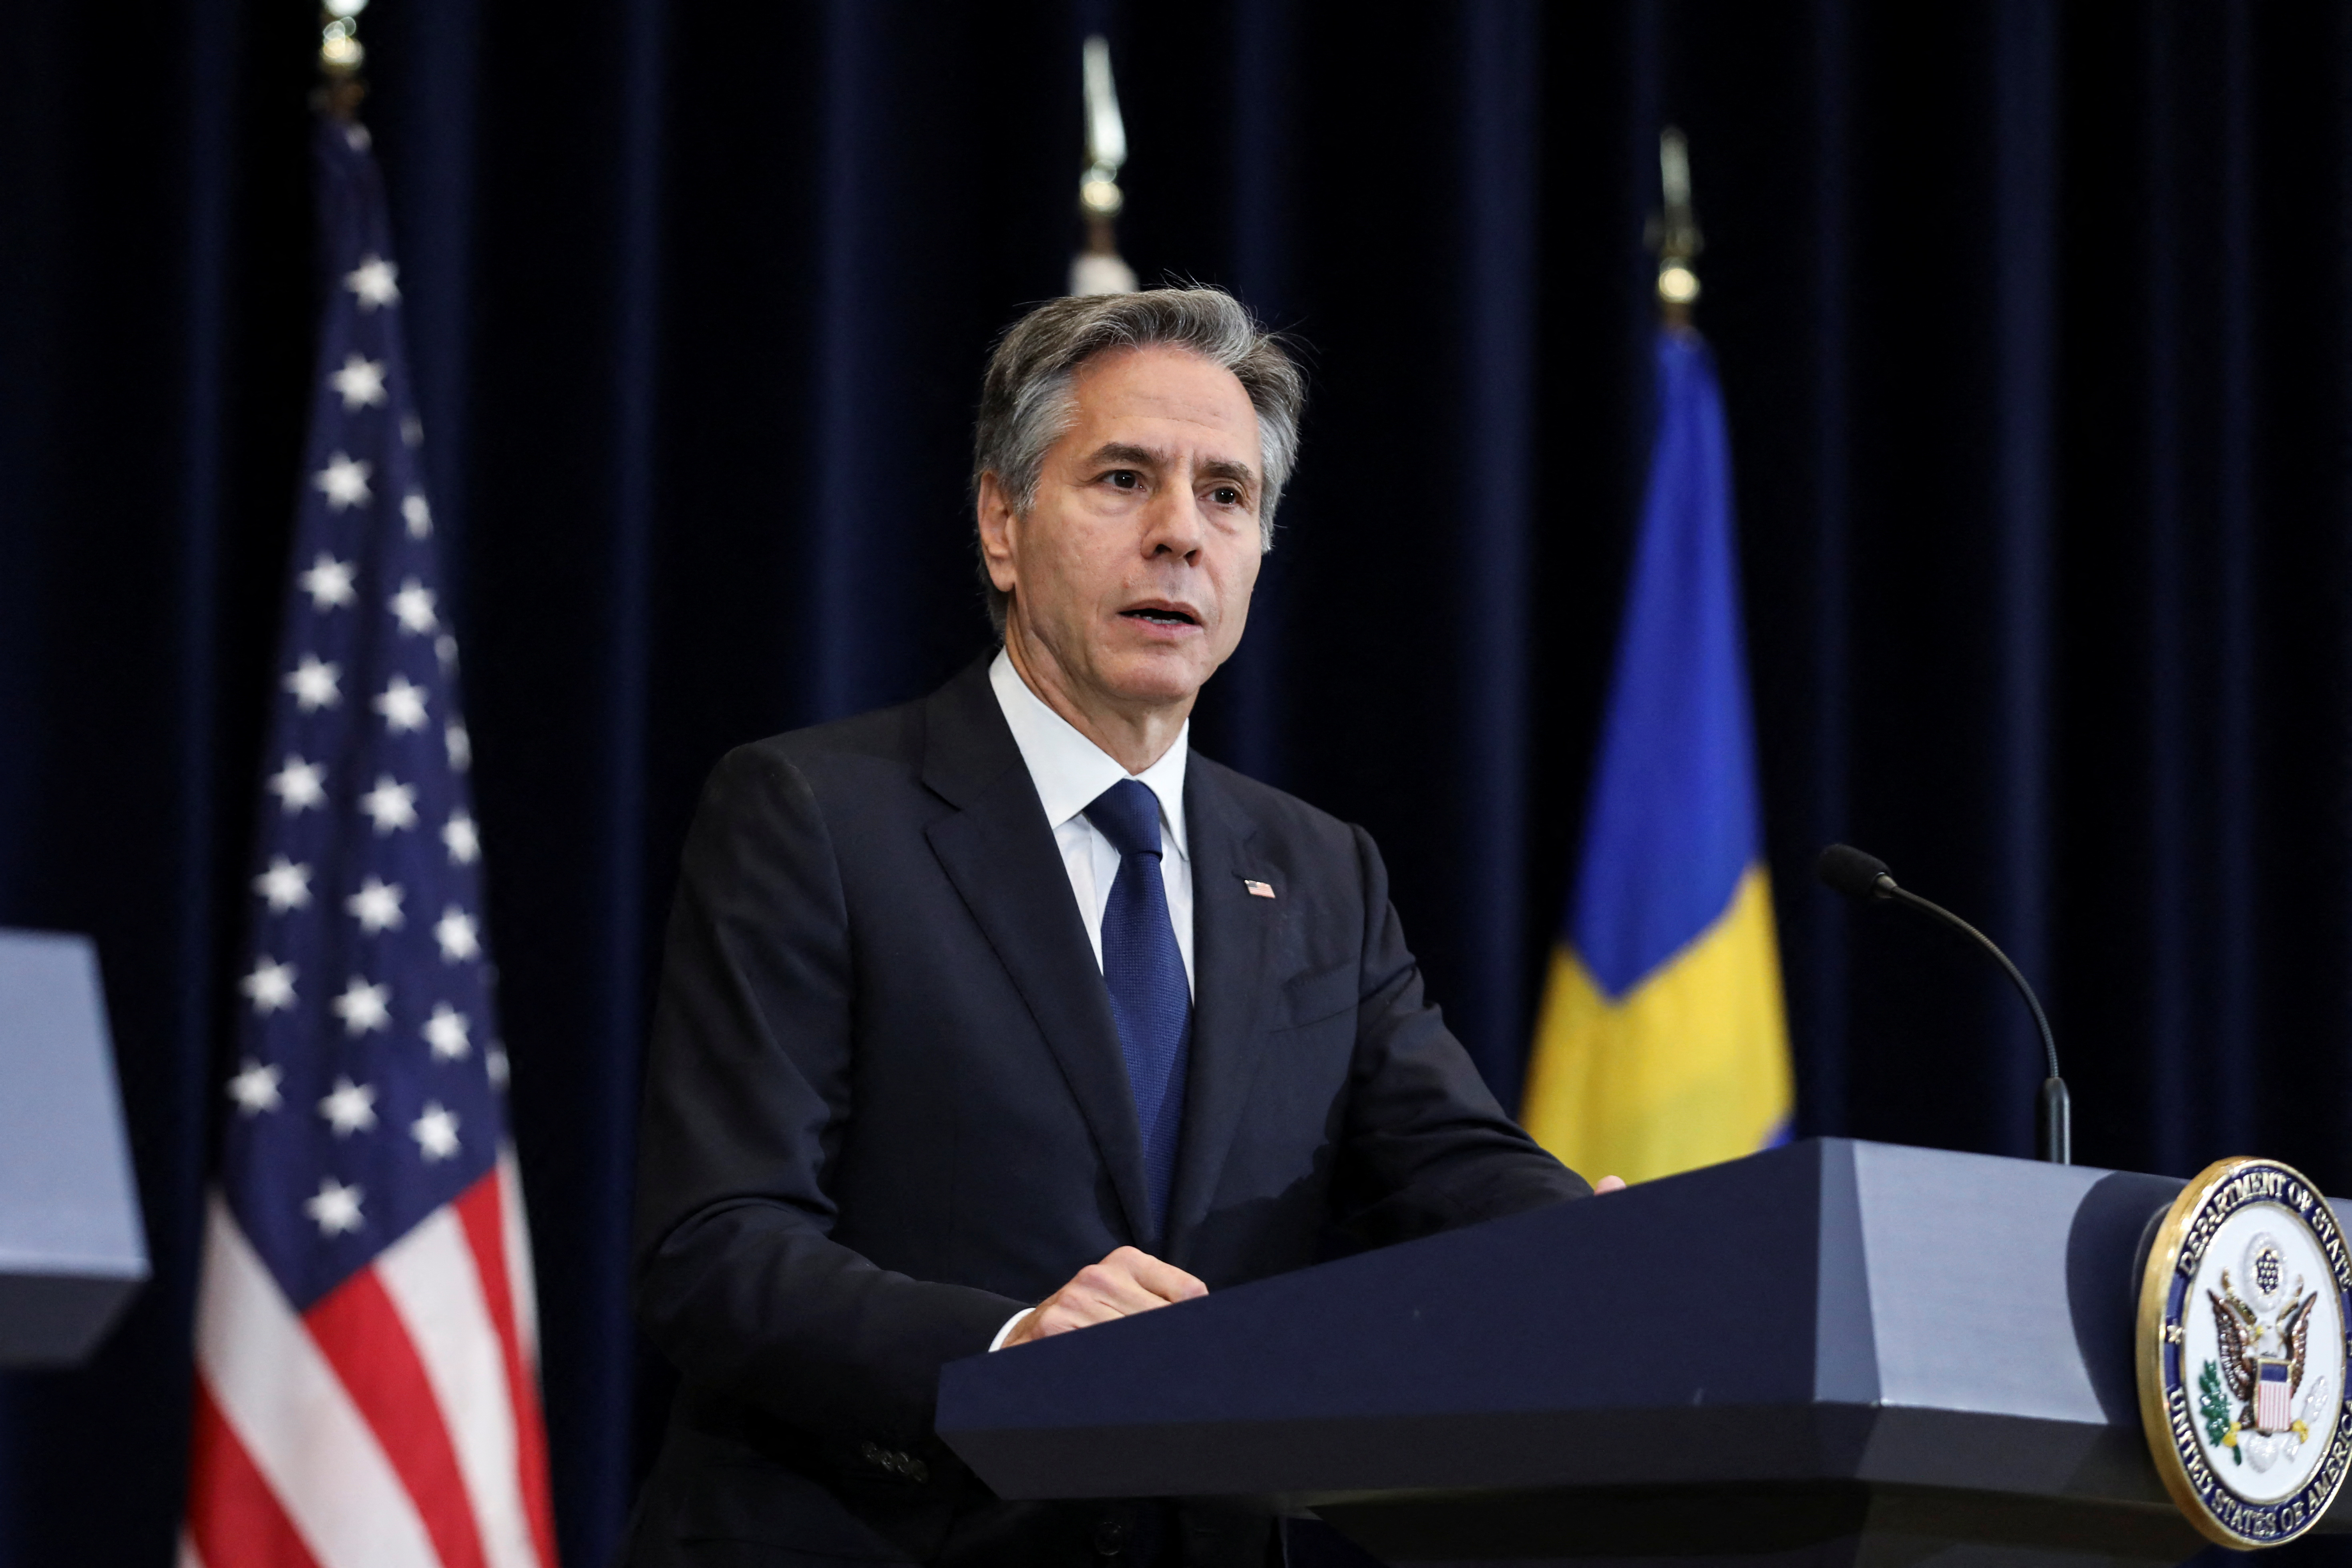 U.S. Secretary of State Blinken holds joint news conference with Sweden Foreign Minister Billstrom and Finland Foreign Minister Haavisto at State Department in Washington